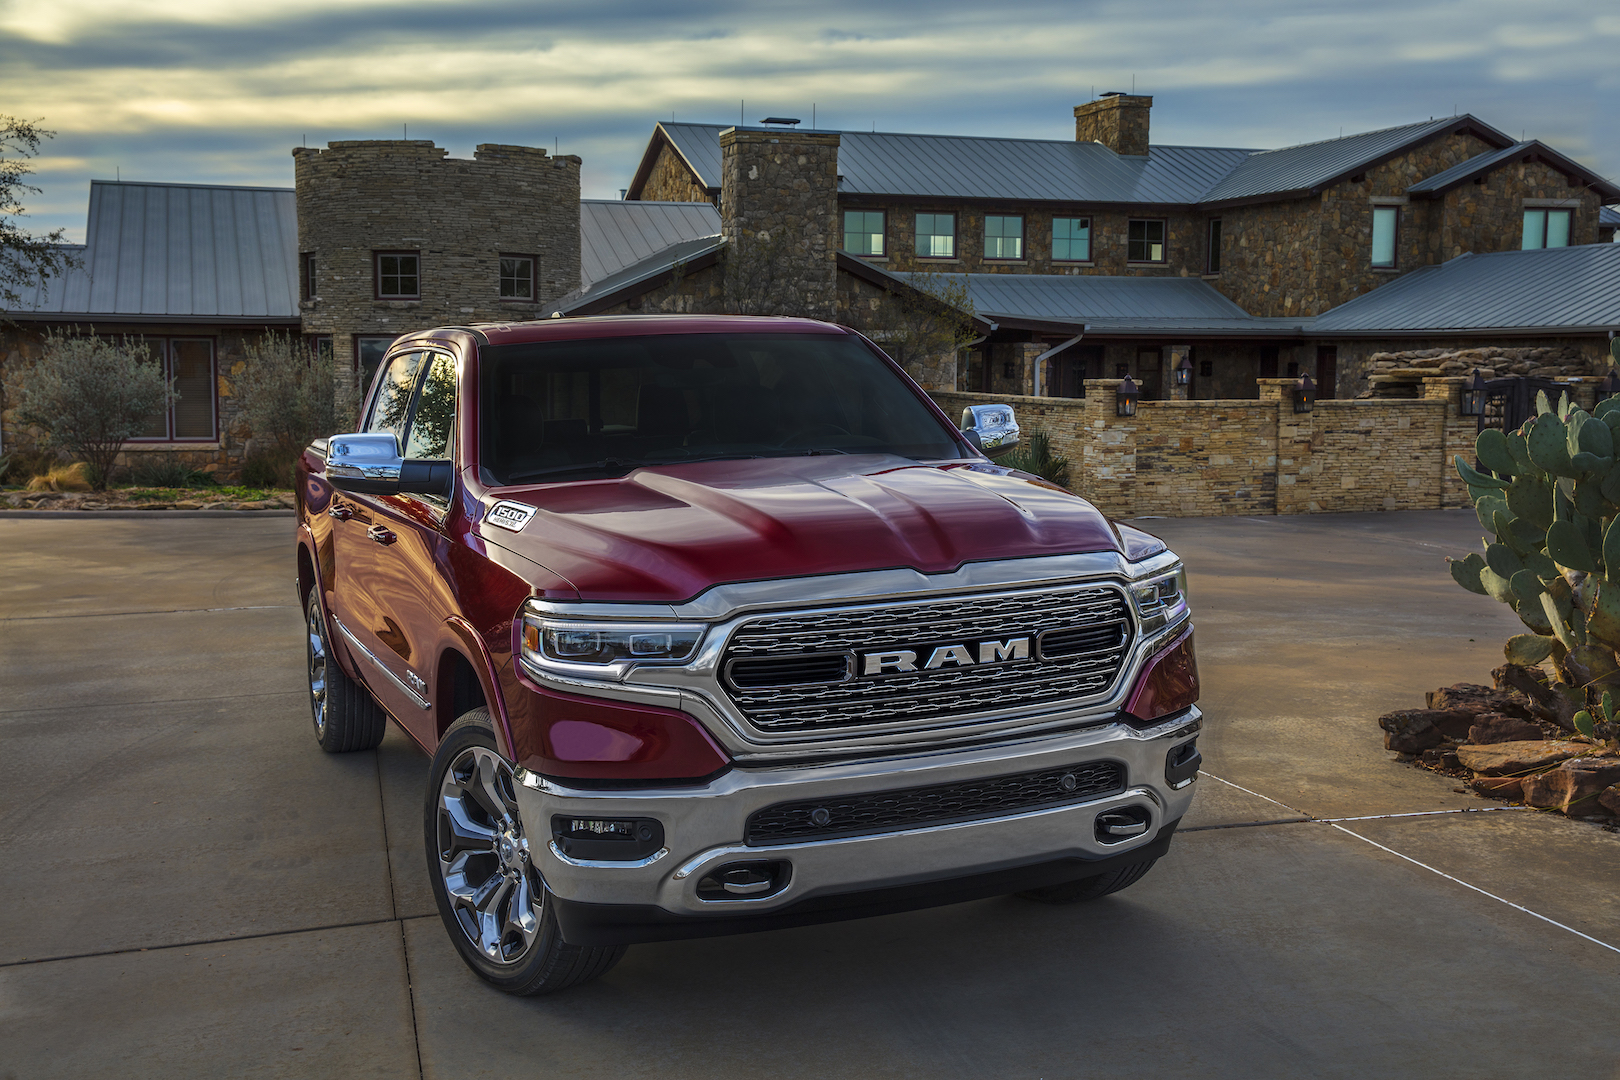 2019 Ram 1500 Limited Review: FCA’s Plush Pickup Truck Lays a Smackdown on Ford and Chevy